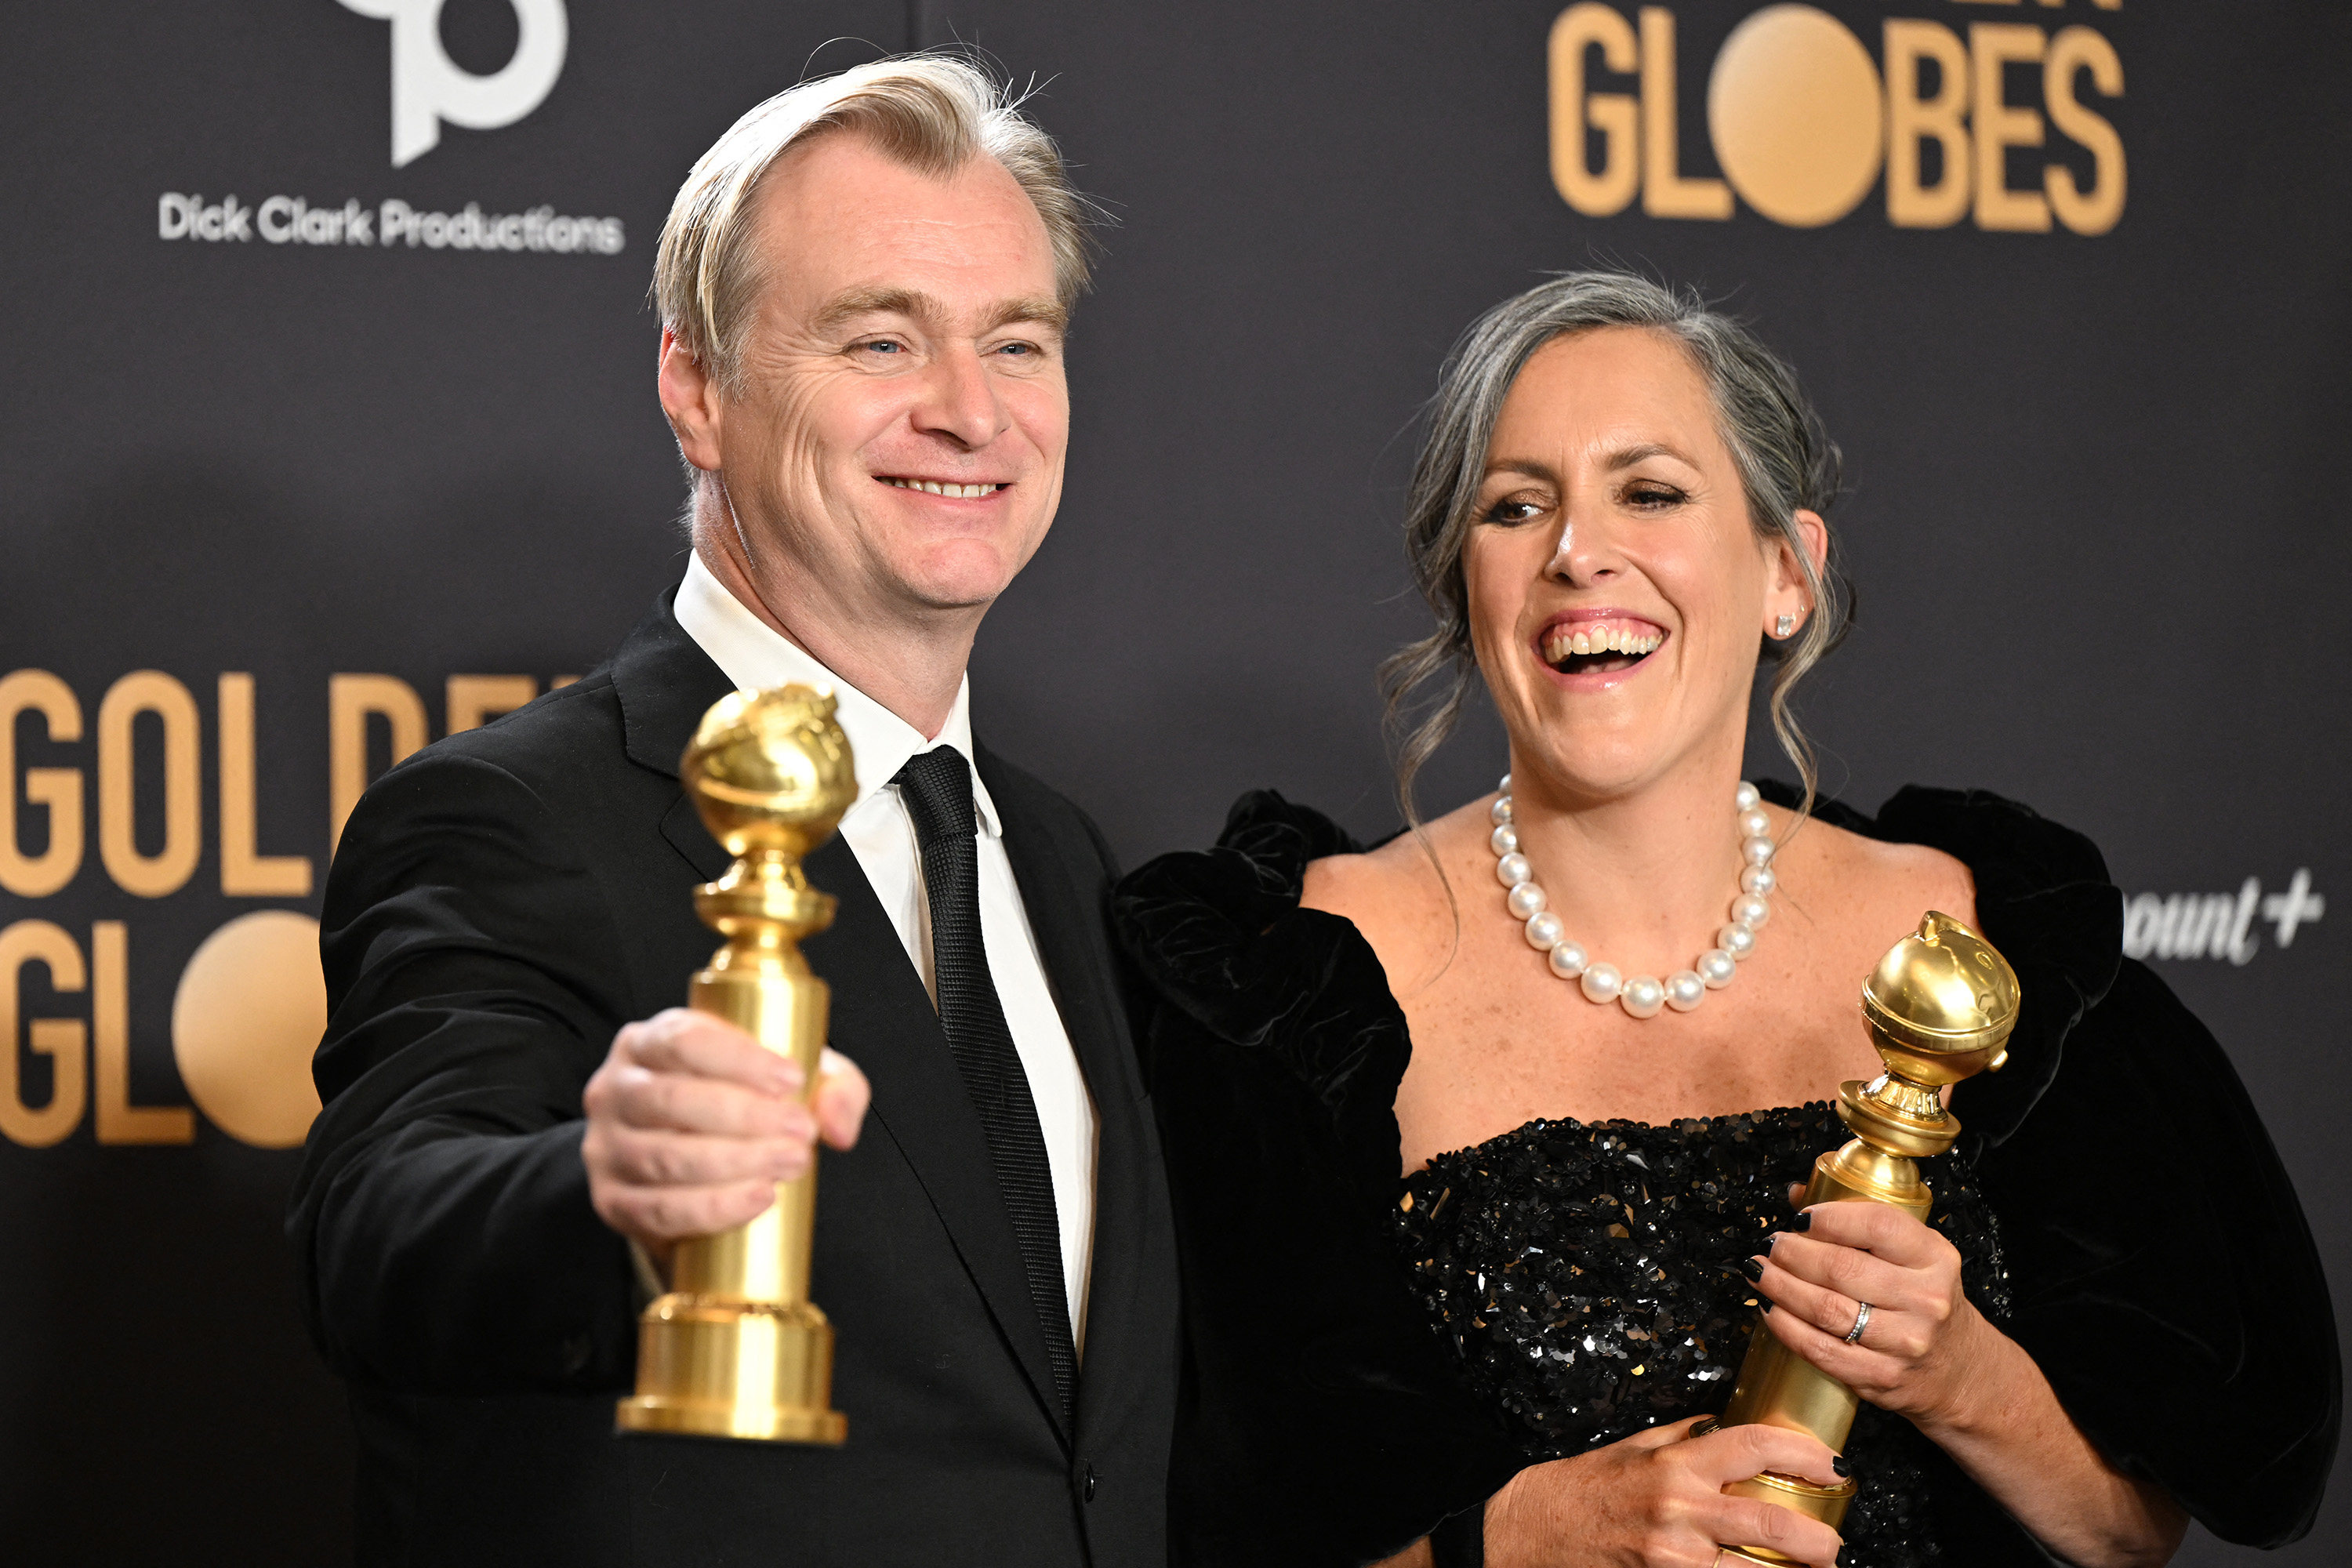 British director Christopher Nolan and his spouse, film producer Emma Thomas, pose with the Golden Globes for best director and Best motion picture - drama for “Oppenheimer” backstage at the 2024 Golden Globe Awards in Beverly Hills, California. Photo: AFP/Getty Images/TNS